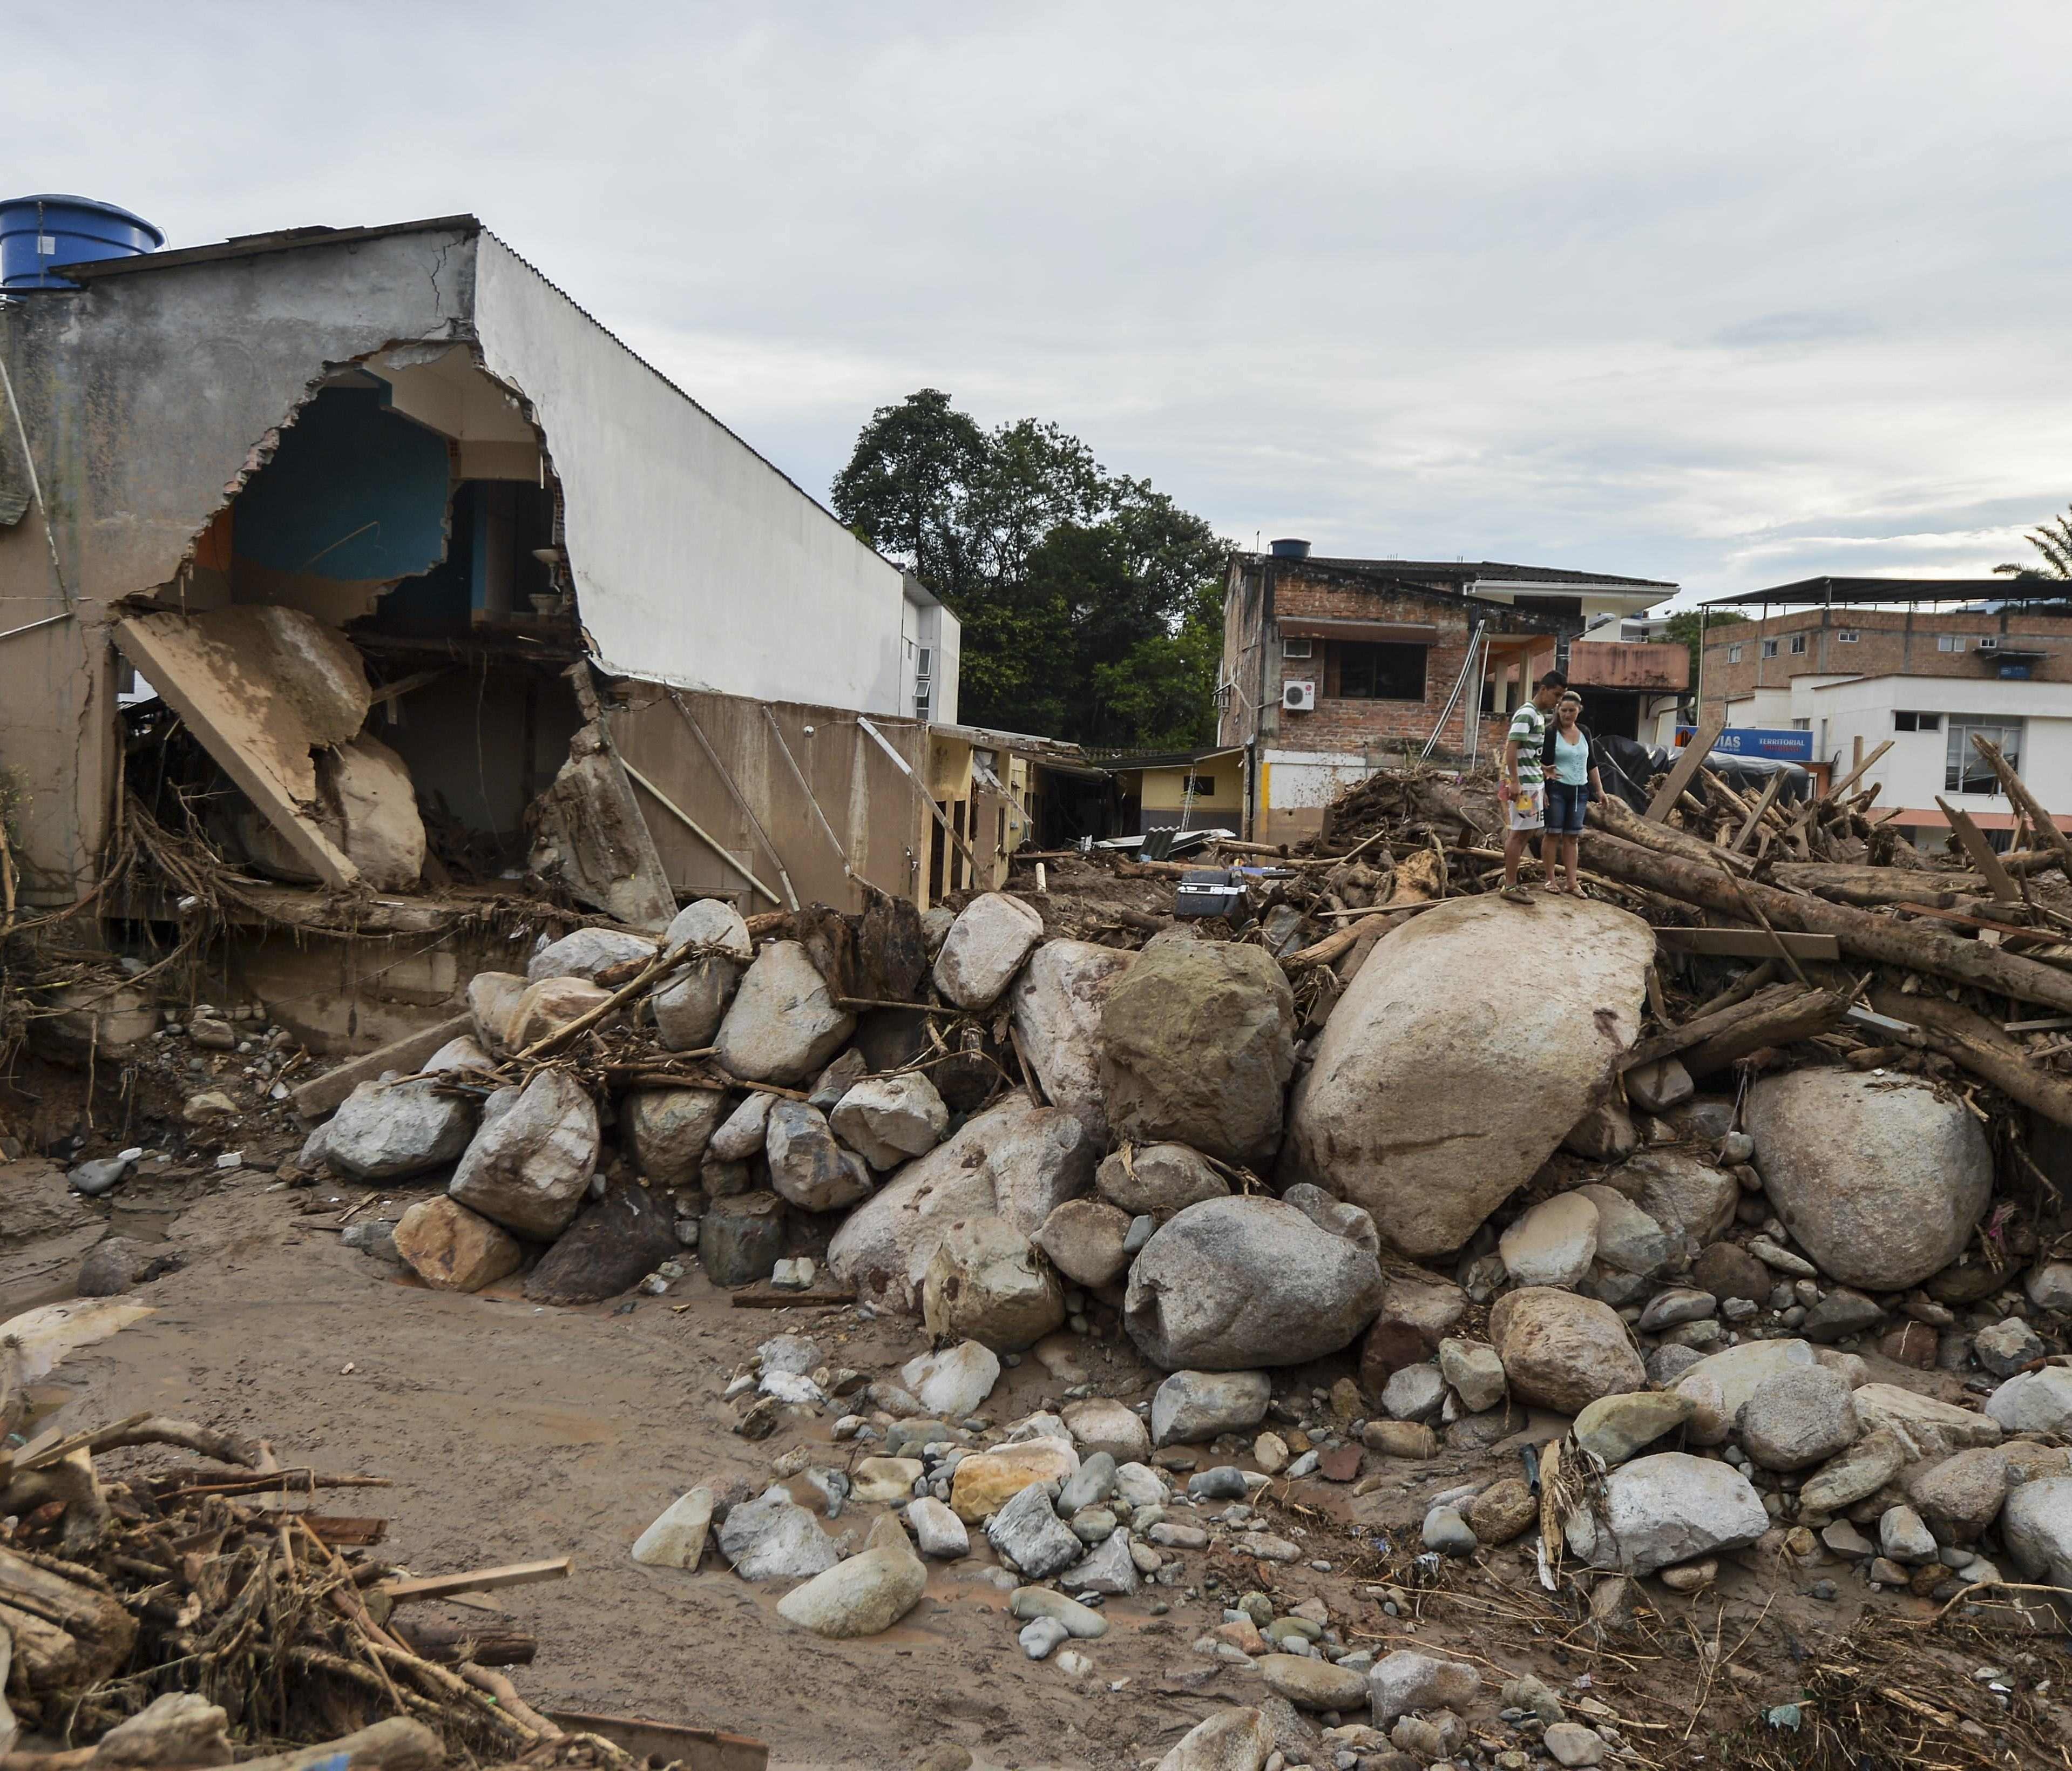 People look at damage caused by slides following heavy rains in Mocoa, Putumayo department, southern Colombia on April 2, 2017.   The death toll from a devastating landslide in the Colombian town of Mocoa stood at around 200 on Sunday as rescuers claw